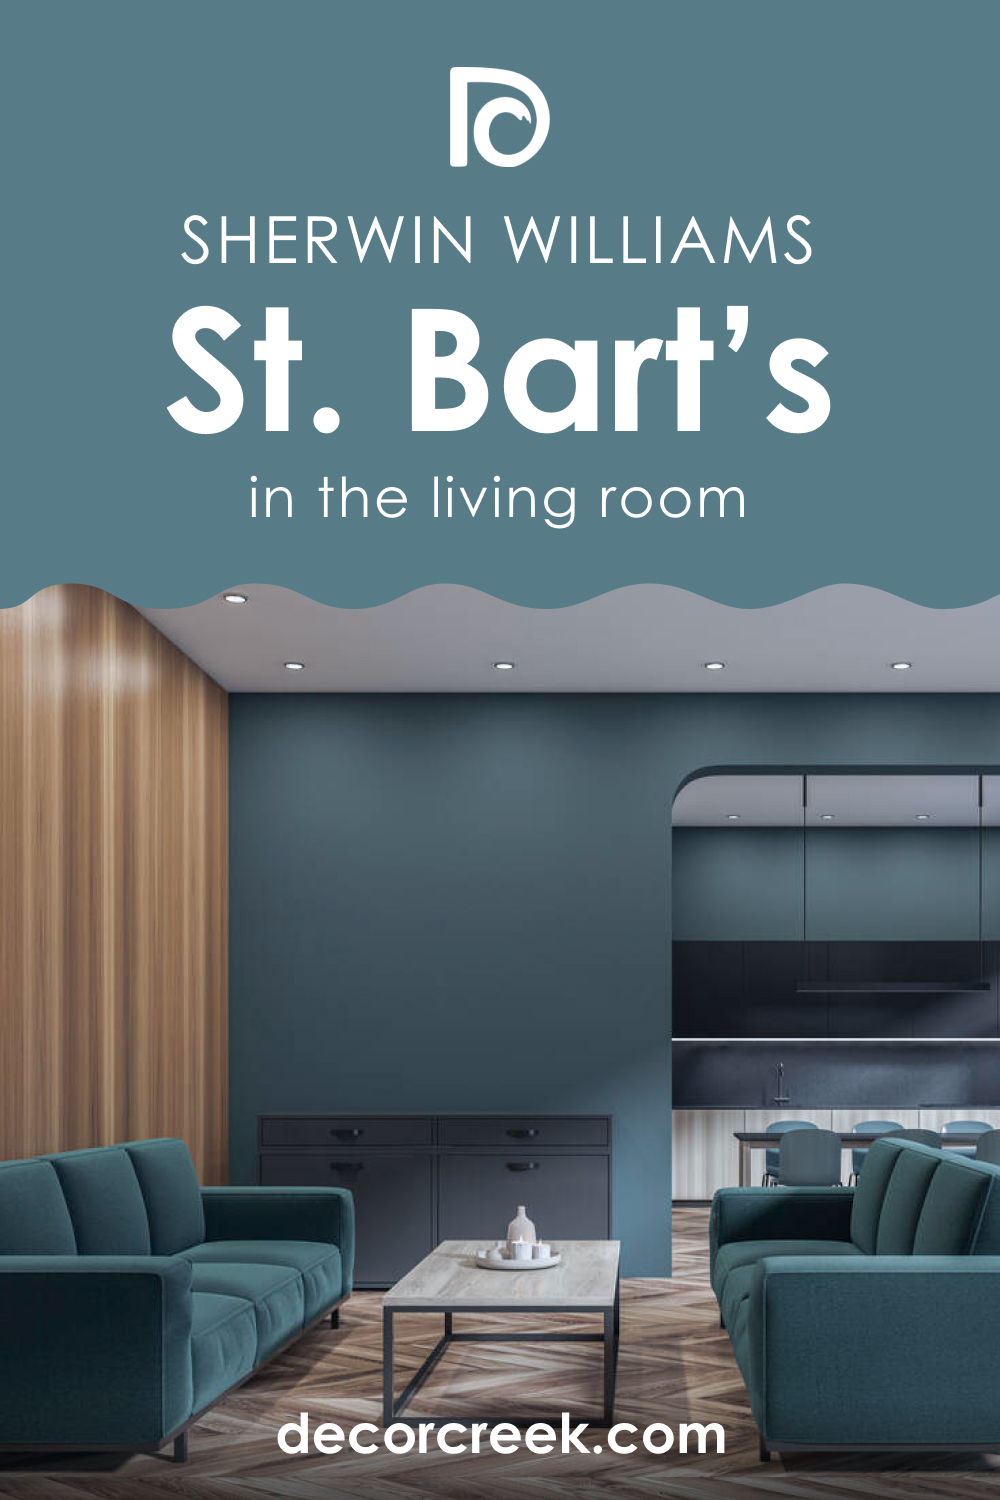 How to Use SW 7614 St. Bart’s in the Living Room?